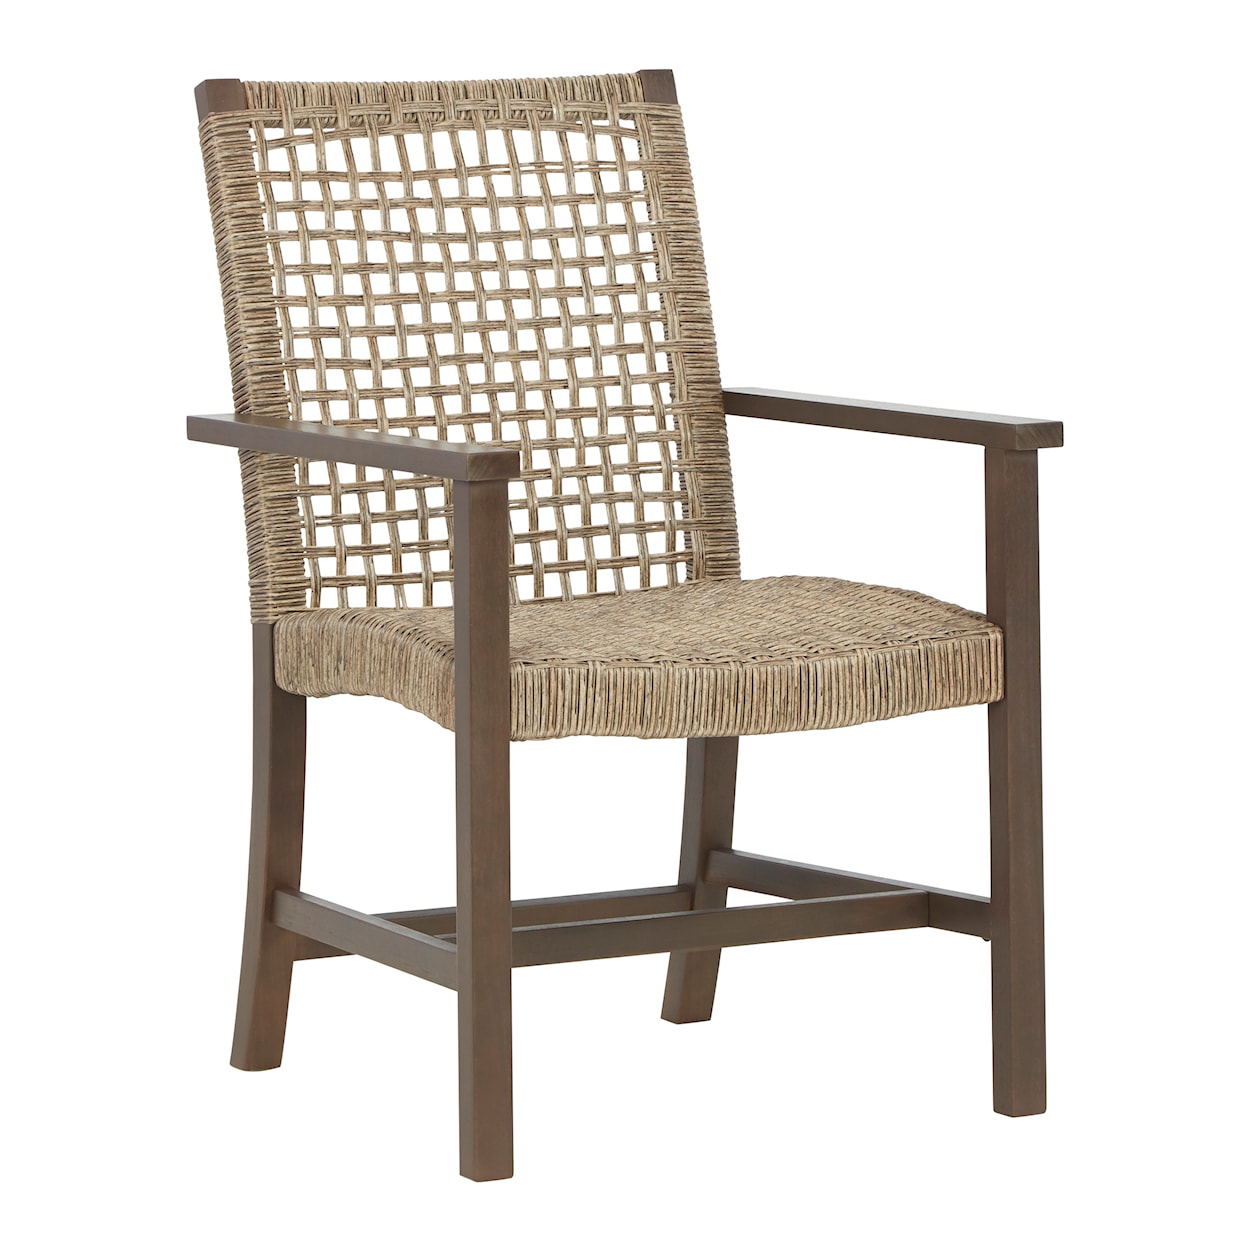 Ashley Furniture Signature Design Germalia Resin Wicker/Wood Outdoor Dining Arm Chair